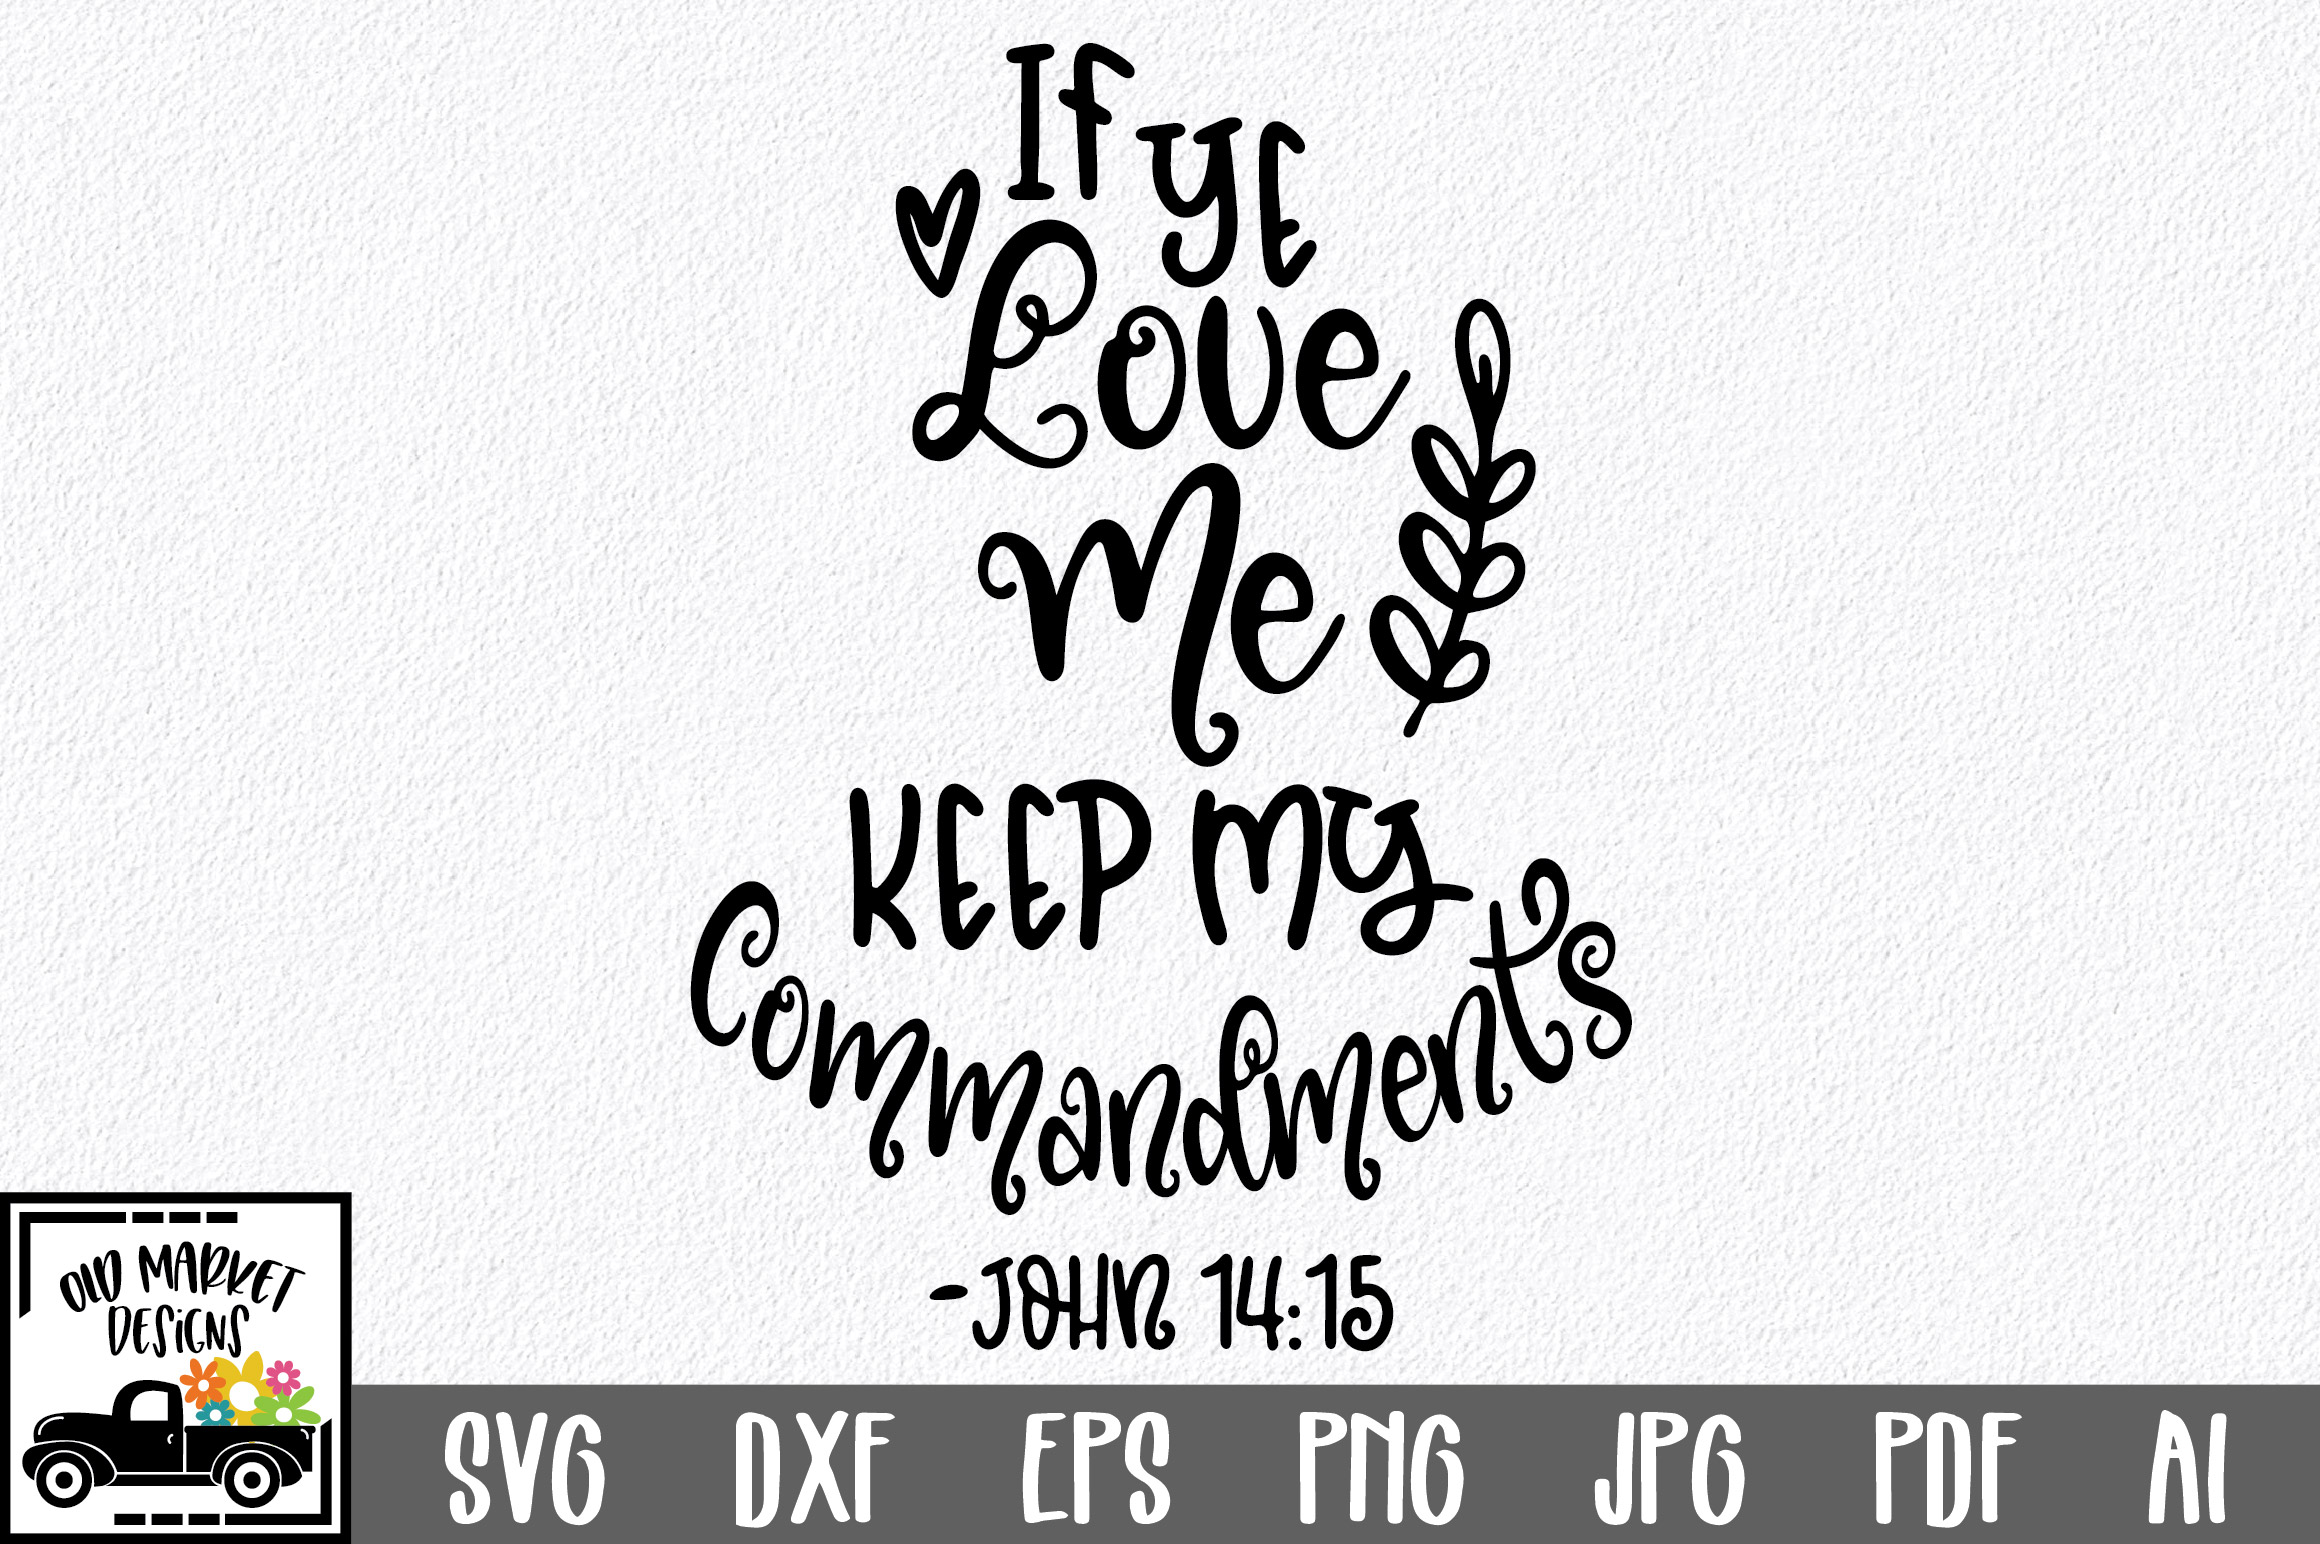 if you love me keep my commandments dinner